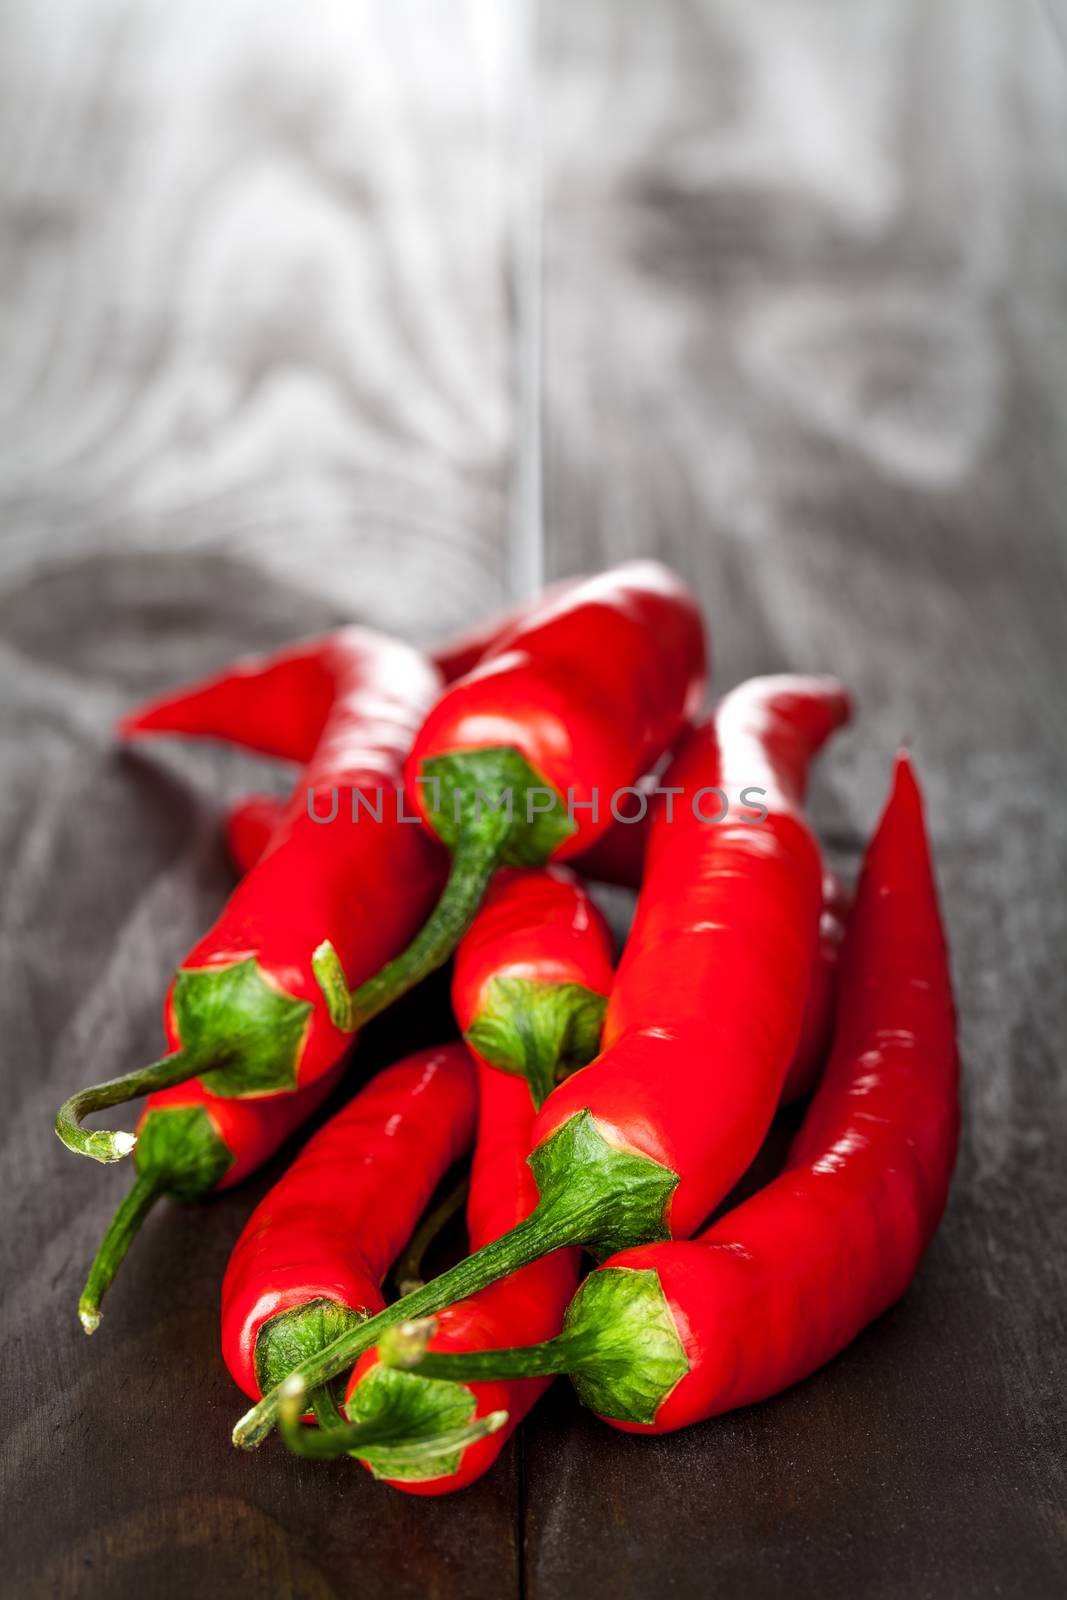 Red chilli pepper on wooden table background